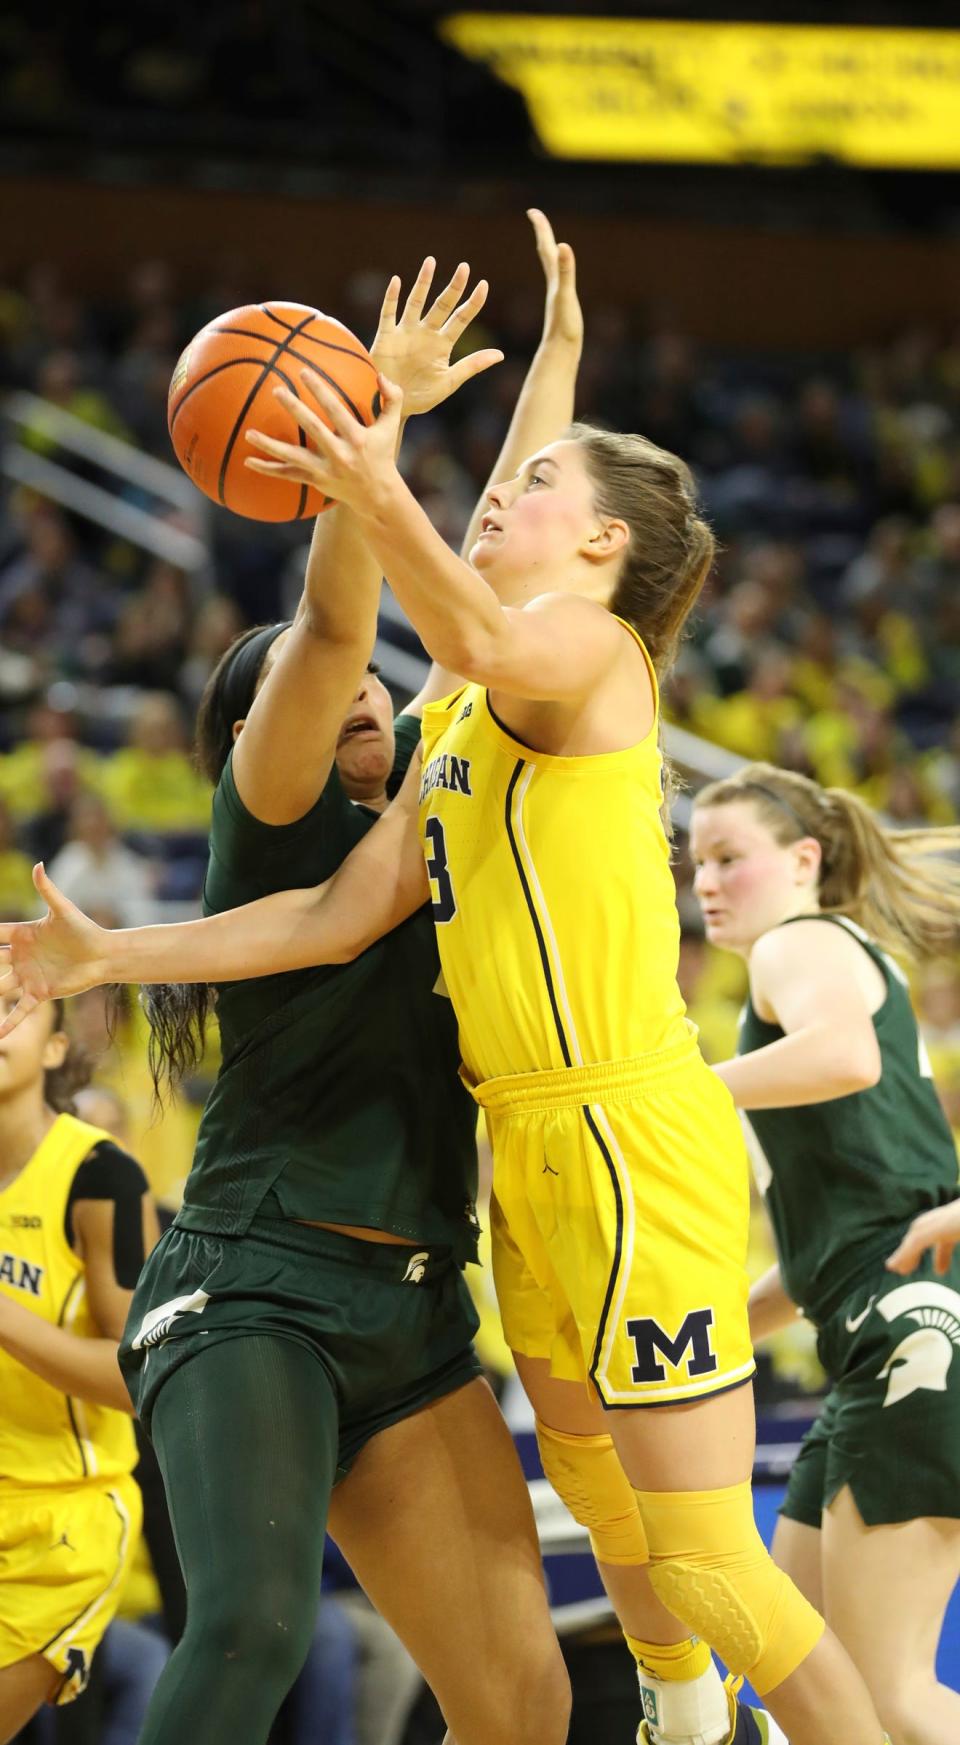 Michigan Wolverines forward Emily Kiser (33) scores against Michigan State Spartans forward Taiyier Parks (14) during fourth-quarter action at Crisler Center in Ann Arbor on Saturday, Jan. 14, 2023.